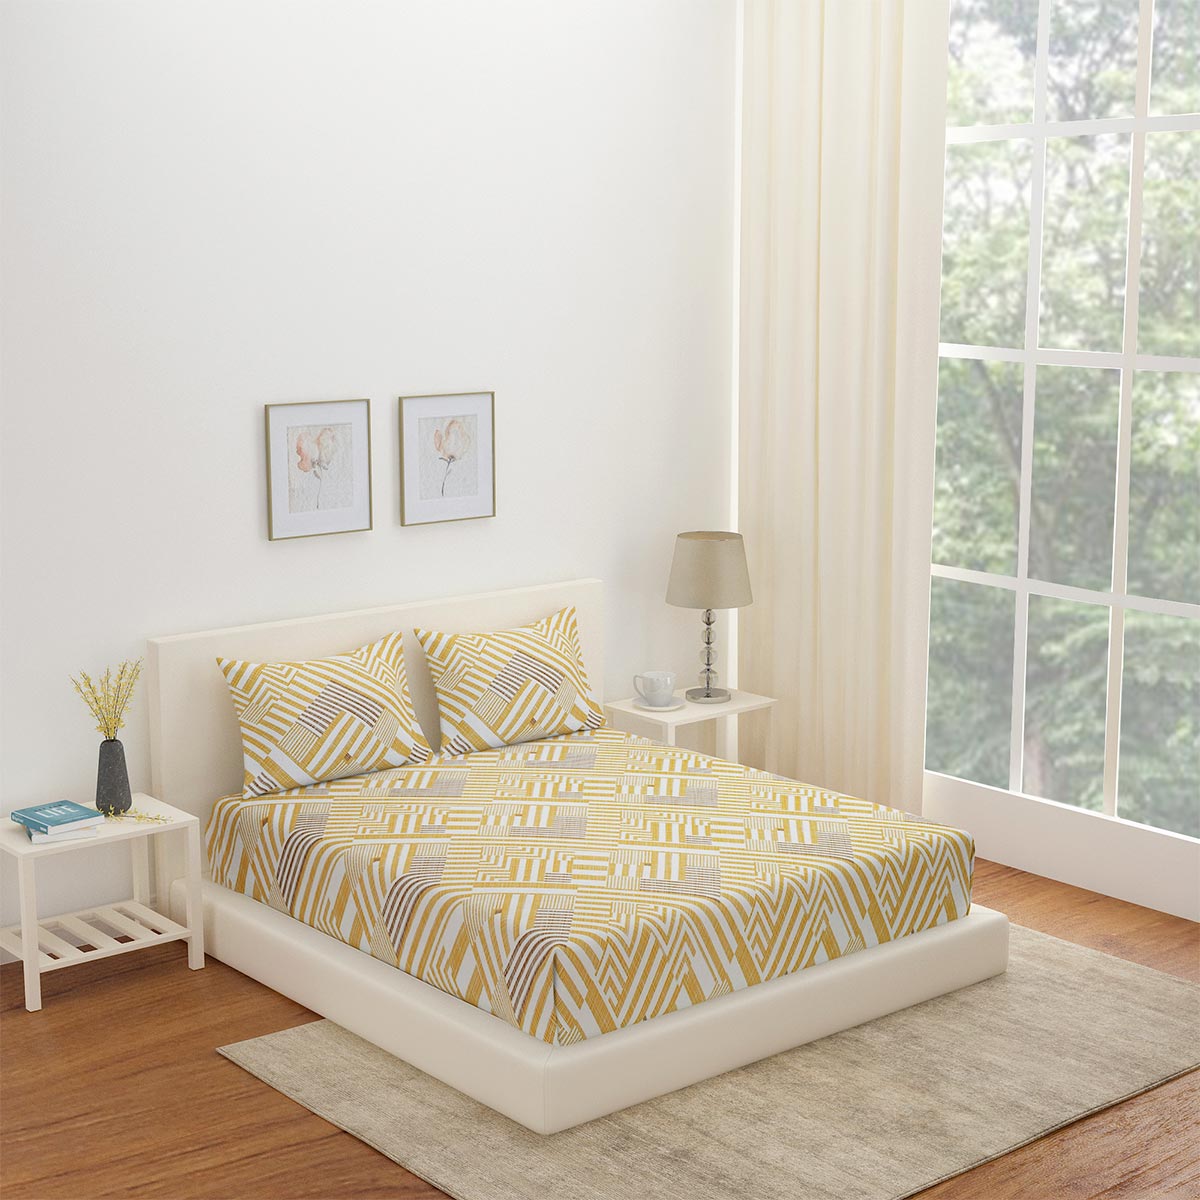 Arias by Lara Dutta Geometric Cotton King Bedsheet With 2 Pillow Covers (Yellow)